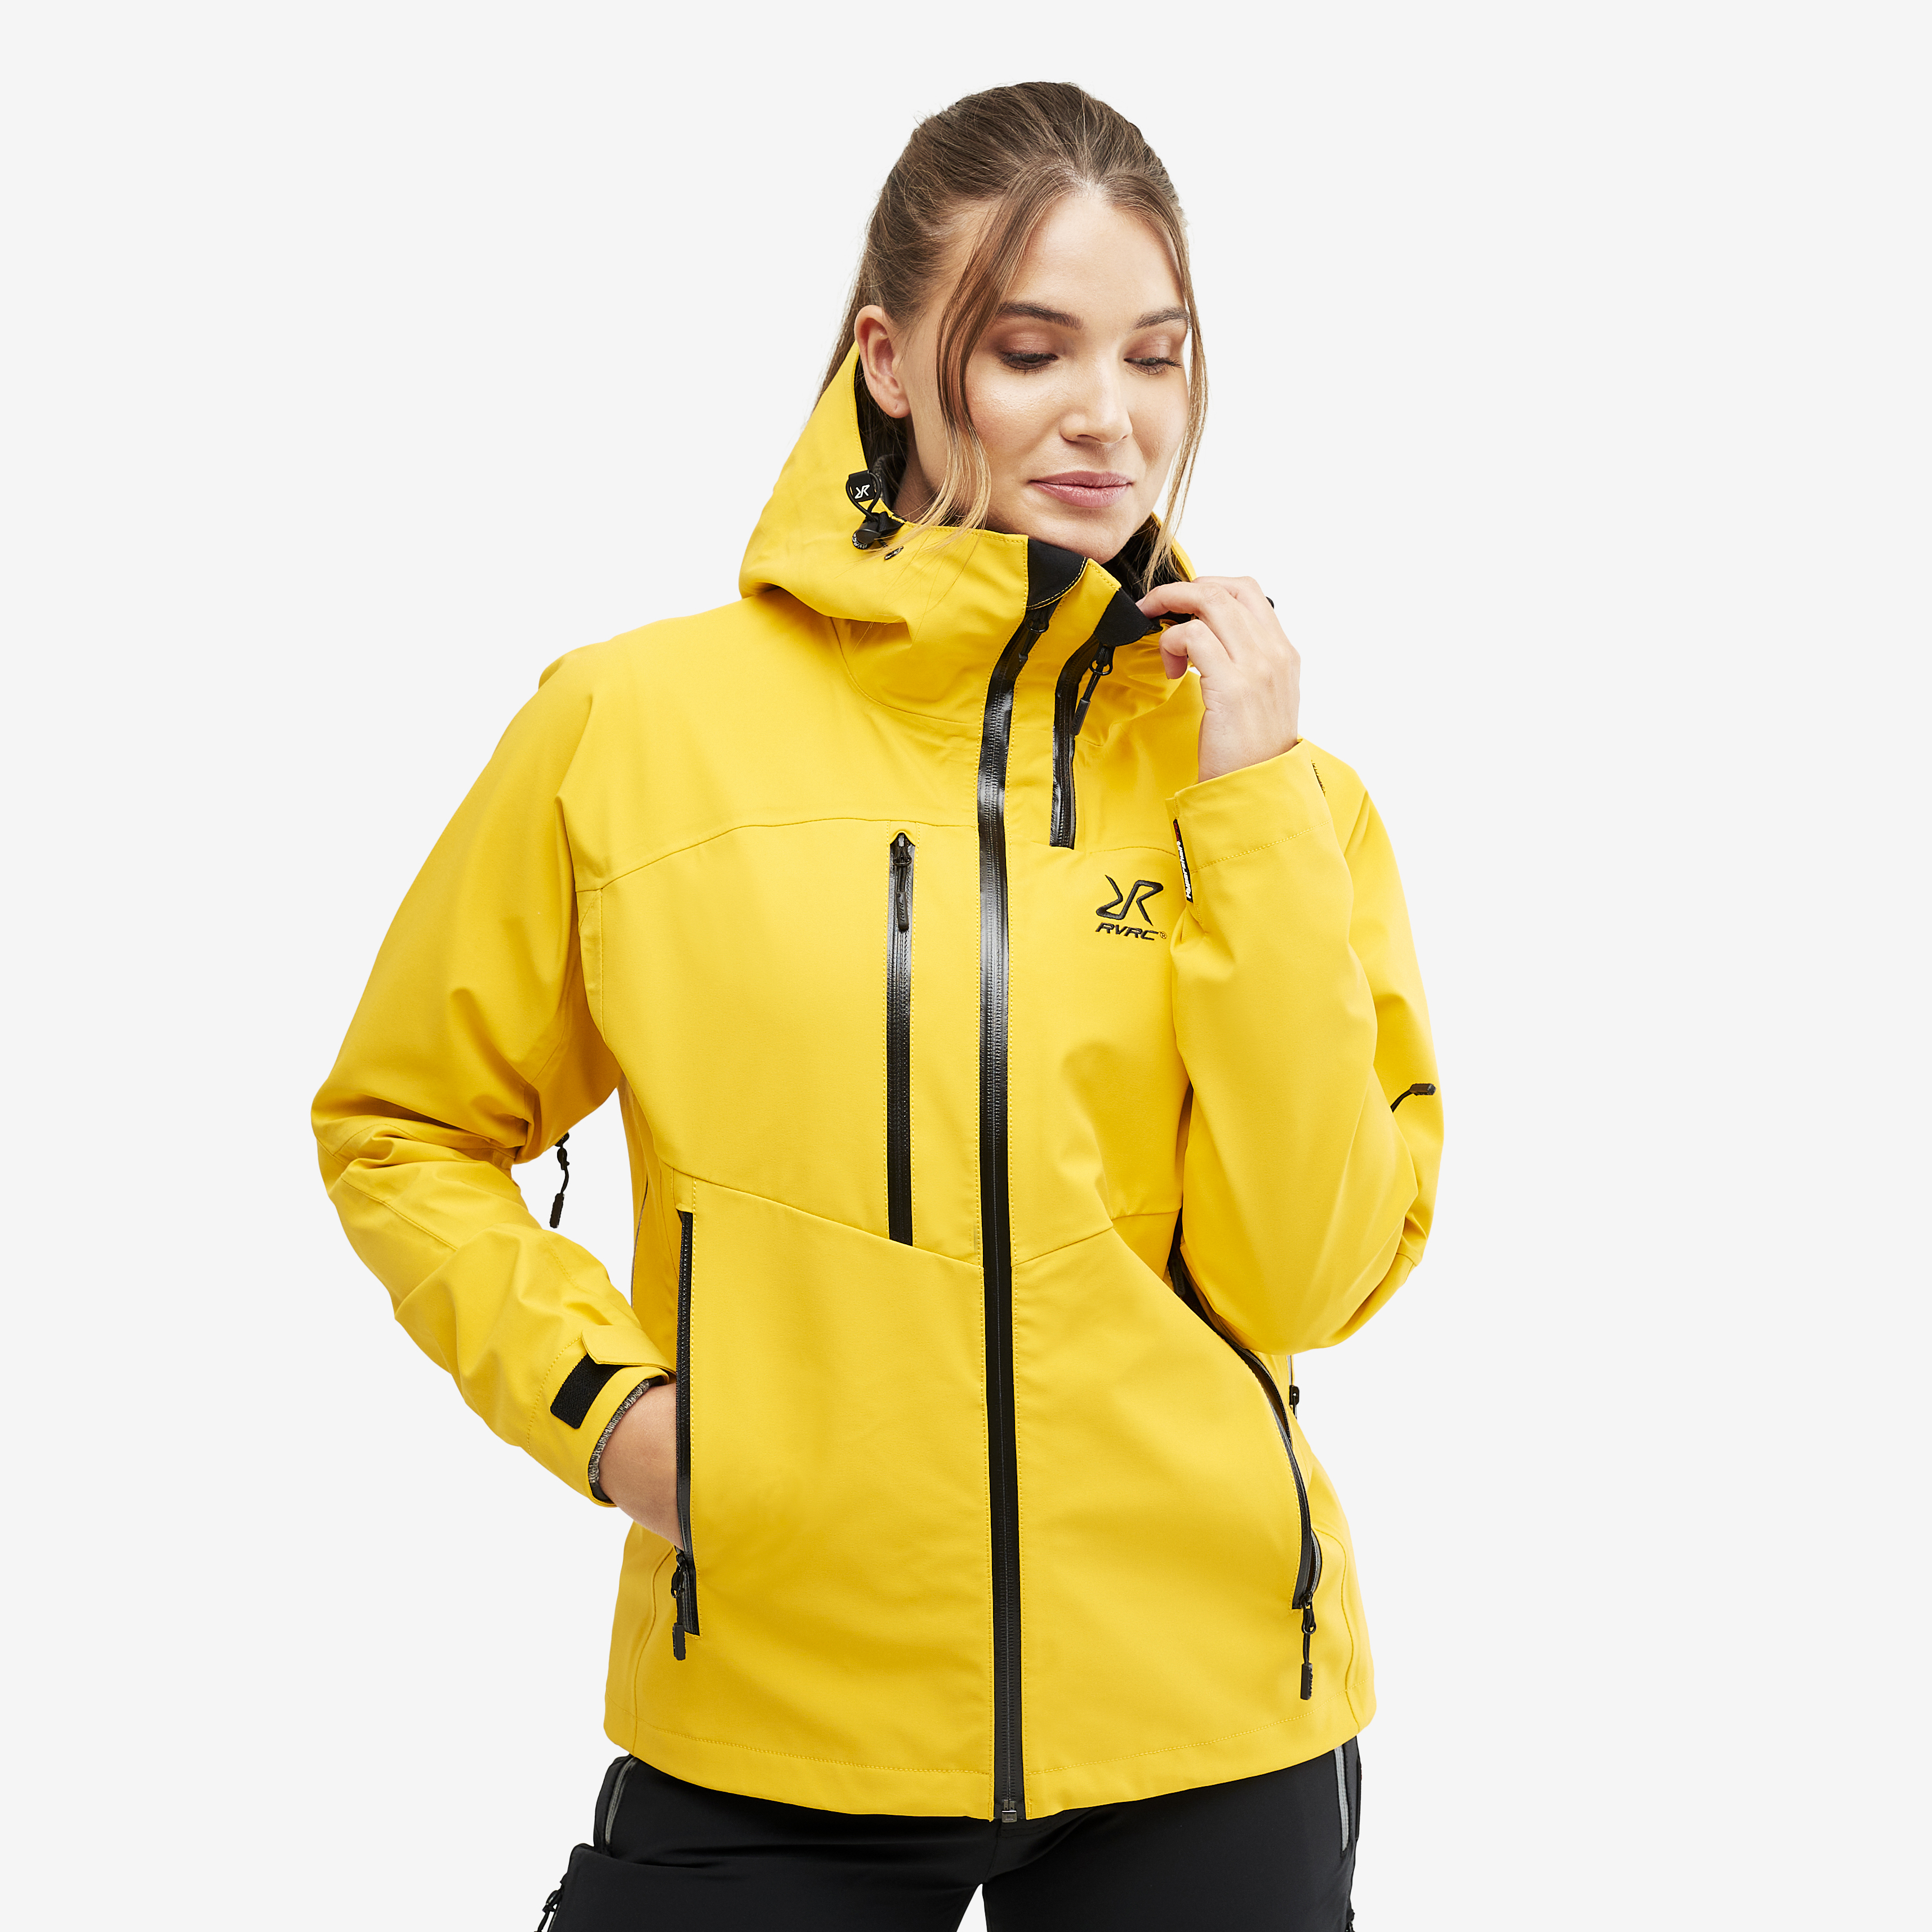 Cyclone Rescue Jacket 2.0 Yellow Donna